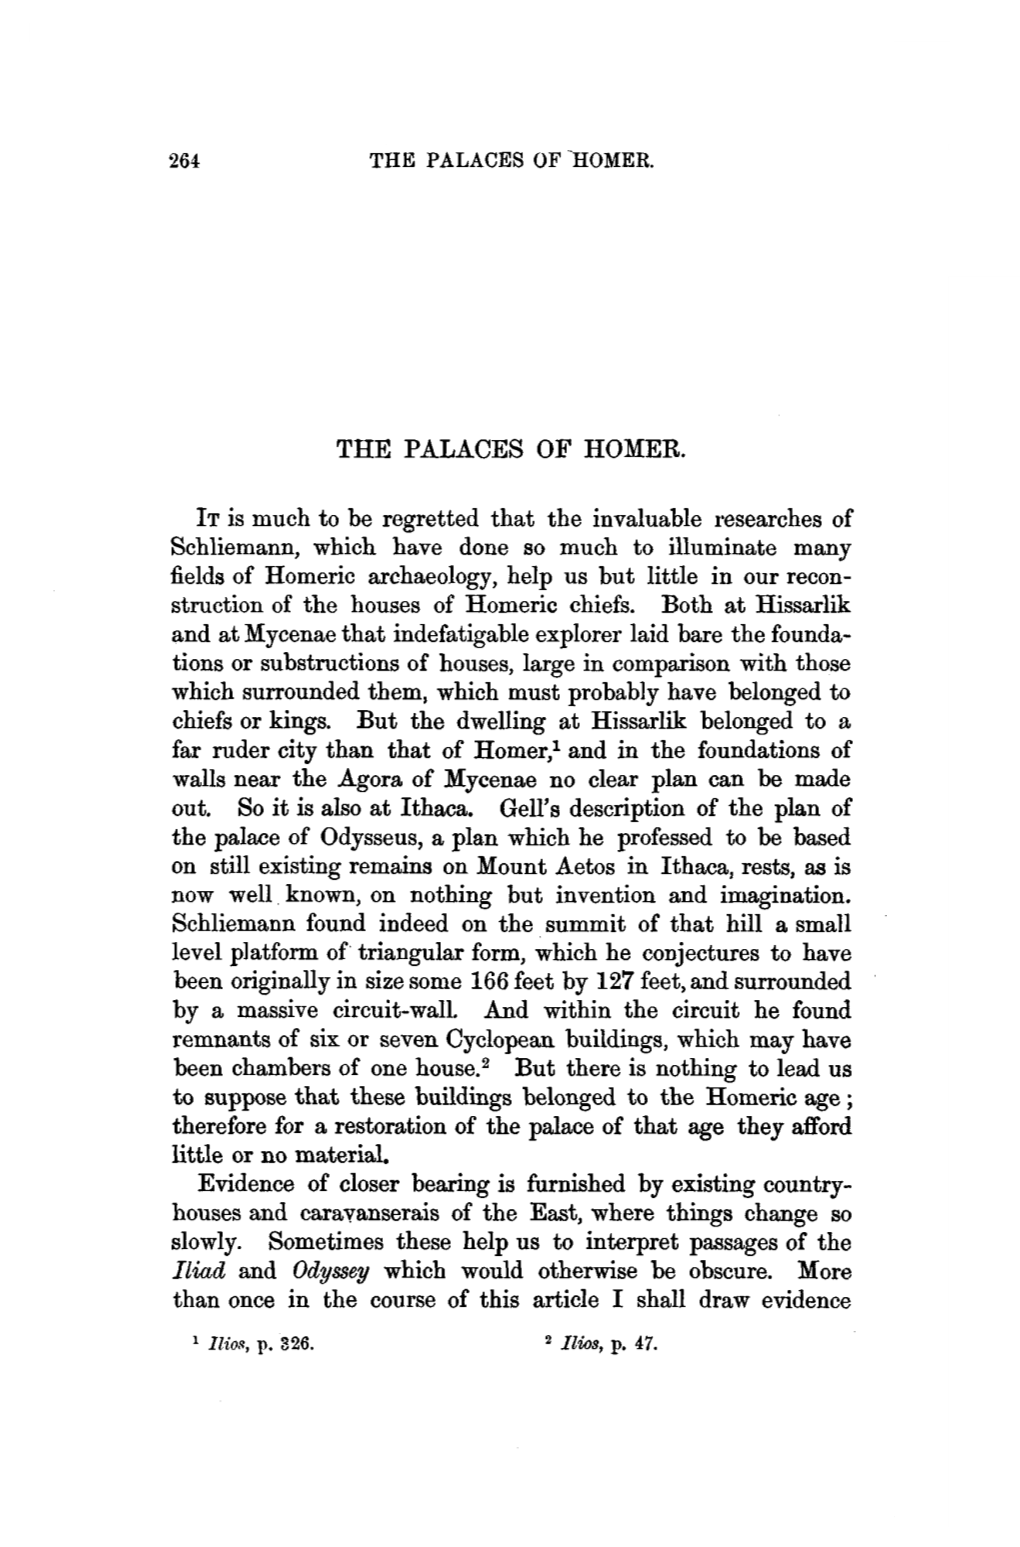 THE PALACES of HOMER. IT Is Much to Be Regretted That